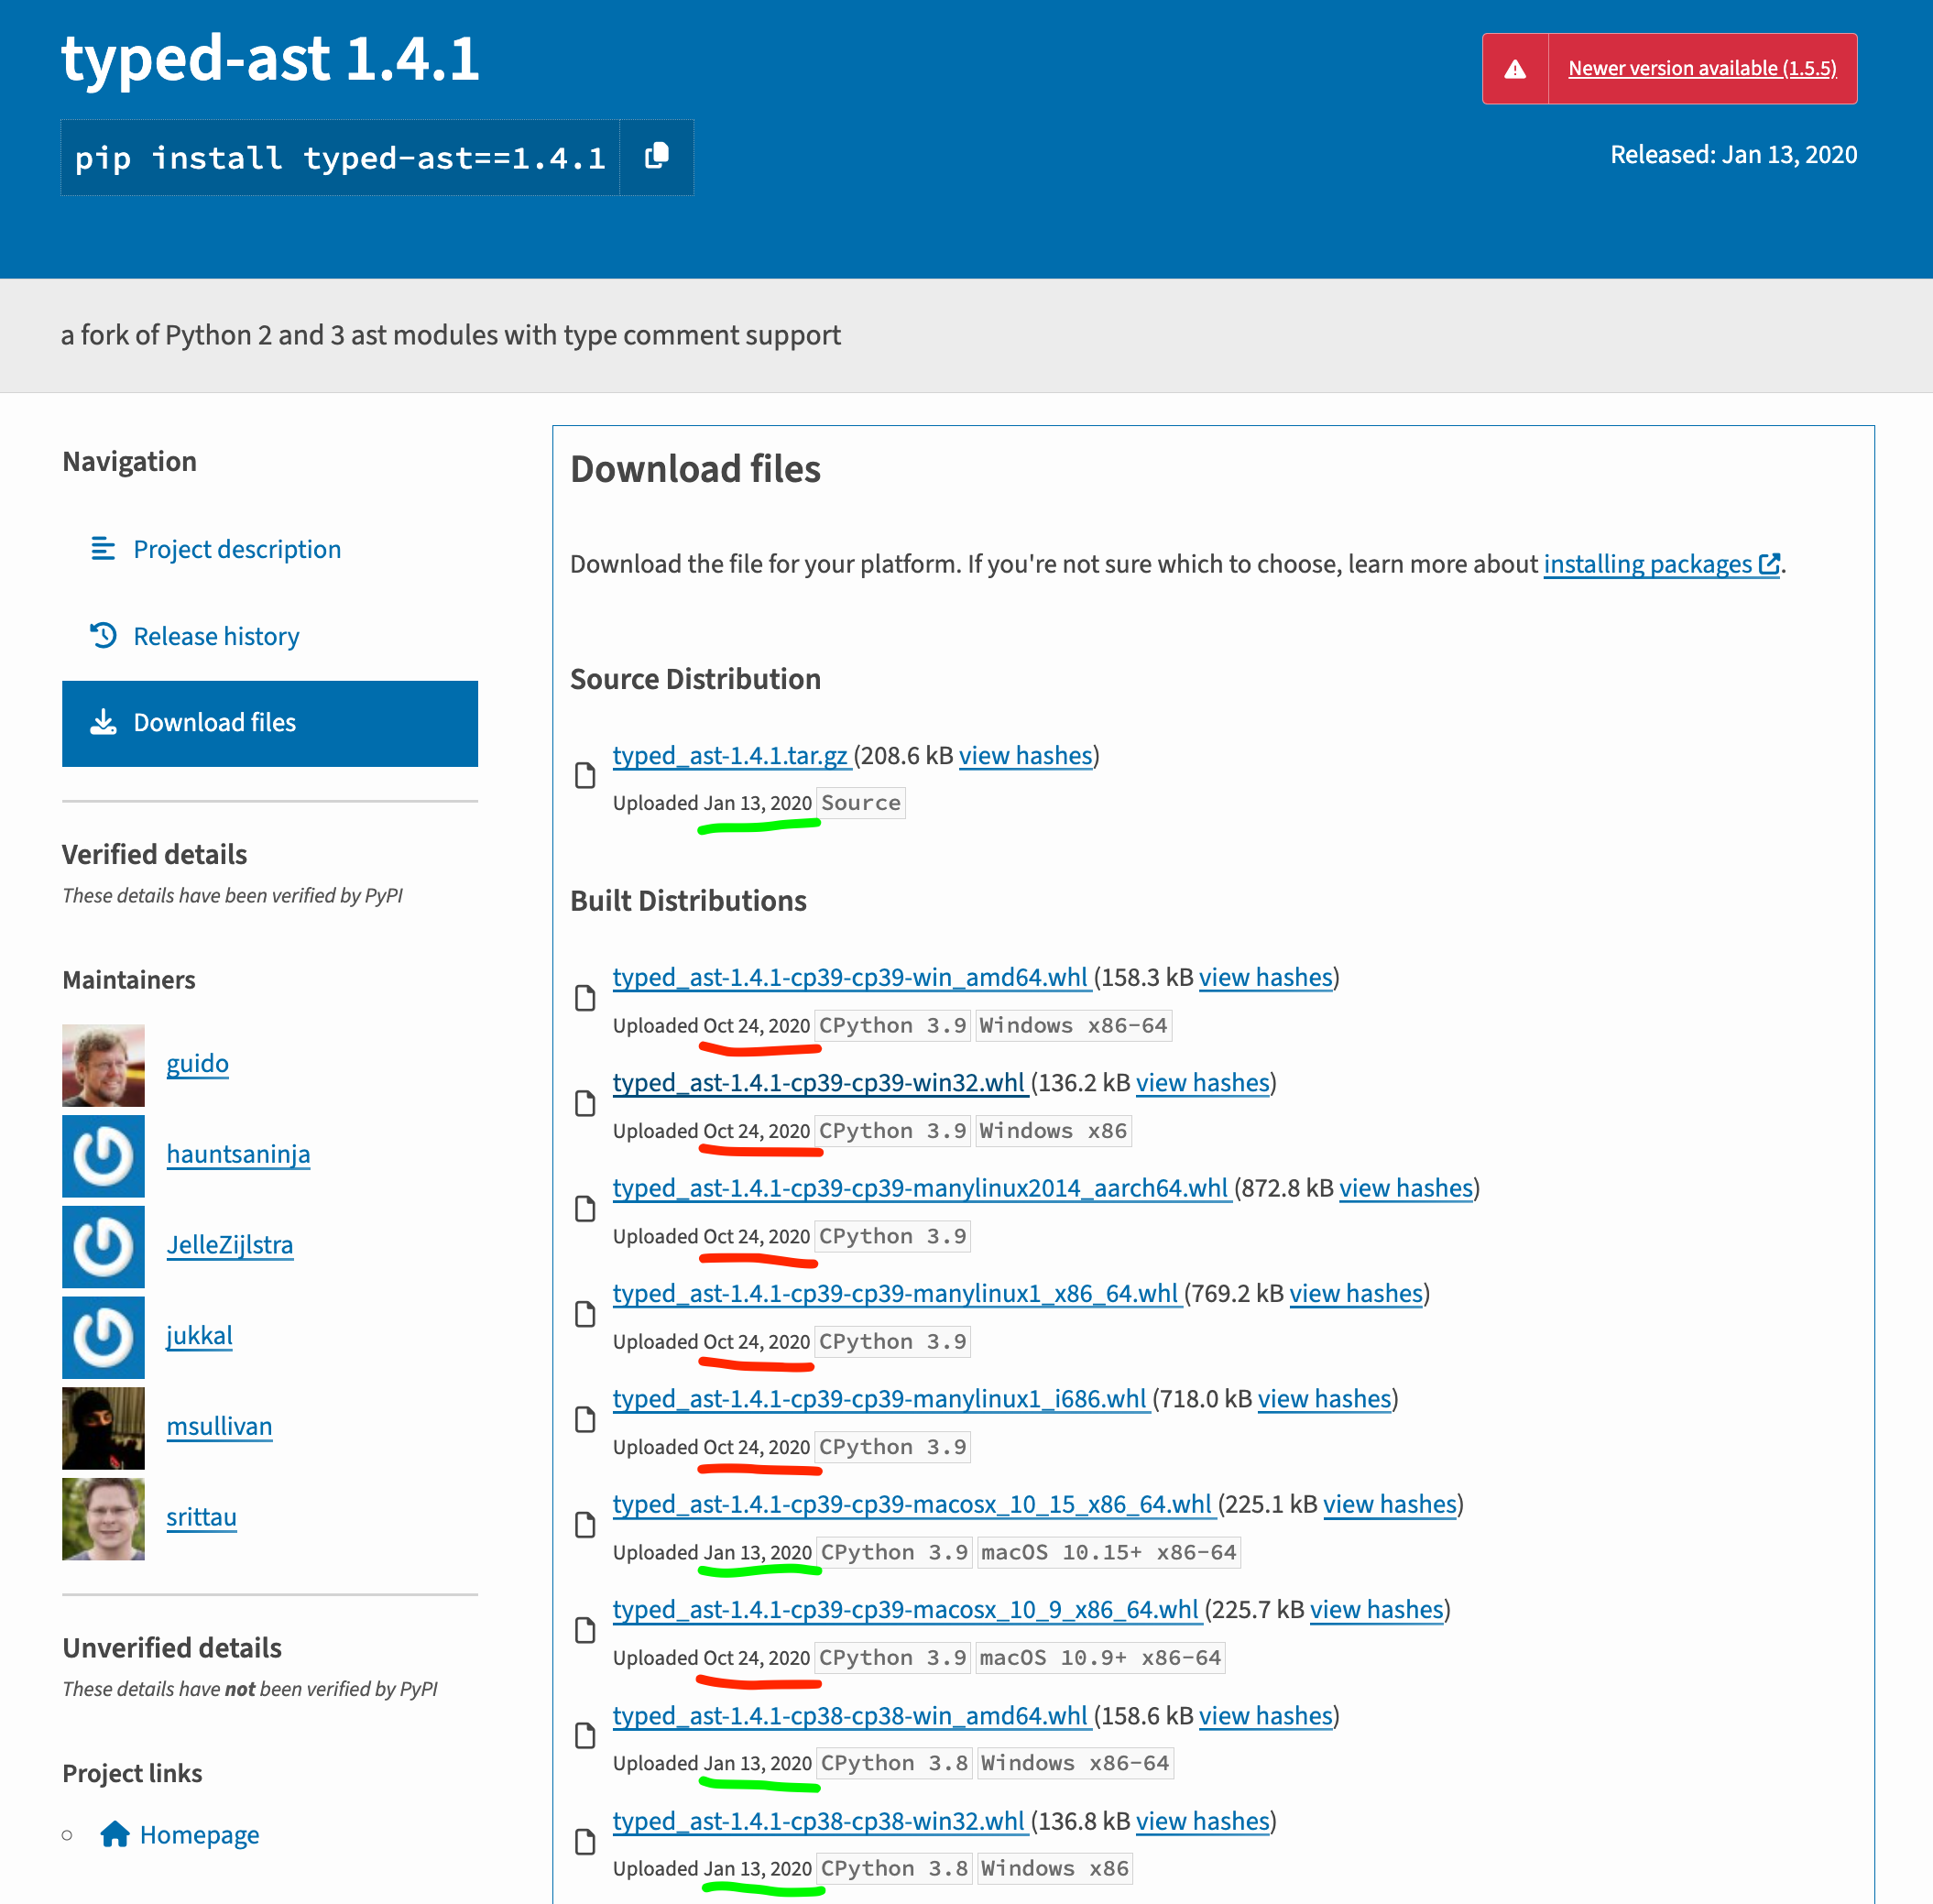 Screenshot of the `typed-ast` package v1.4.1 artifacts showing a wide upload date range